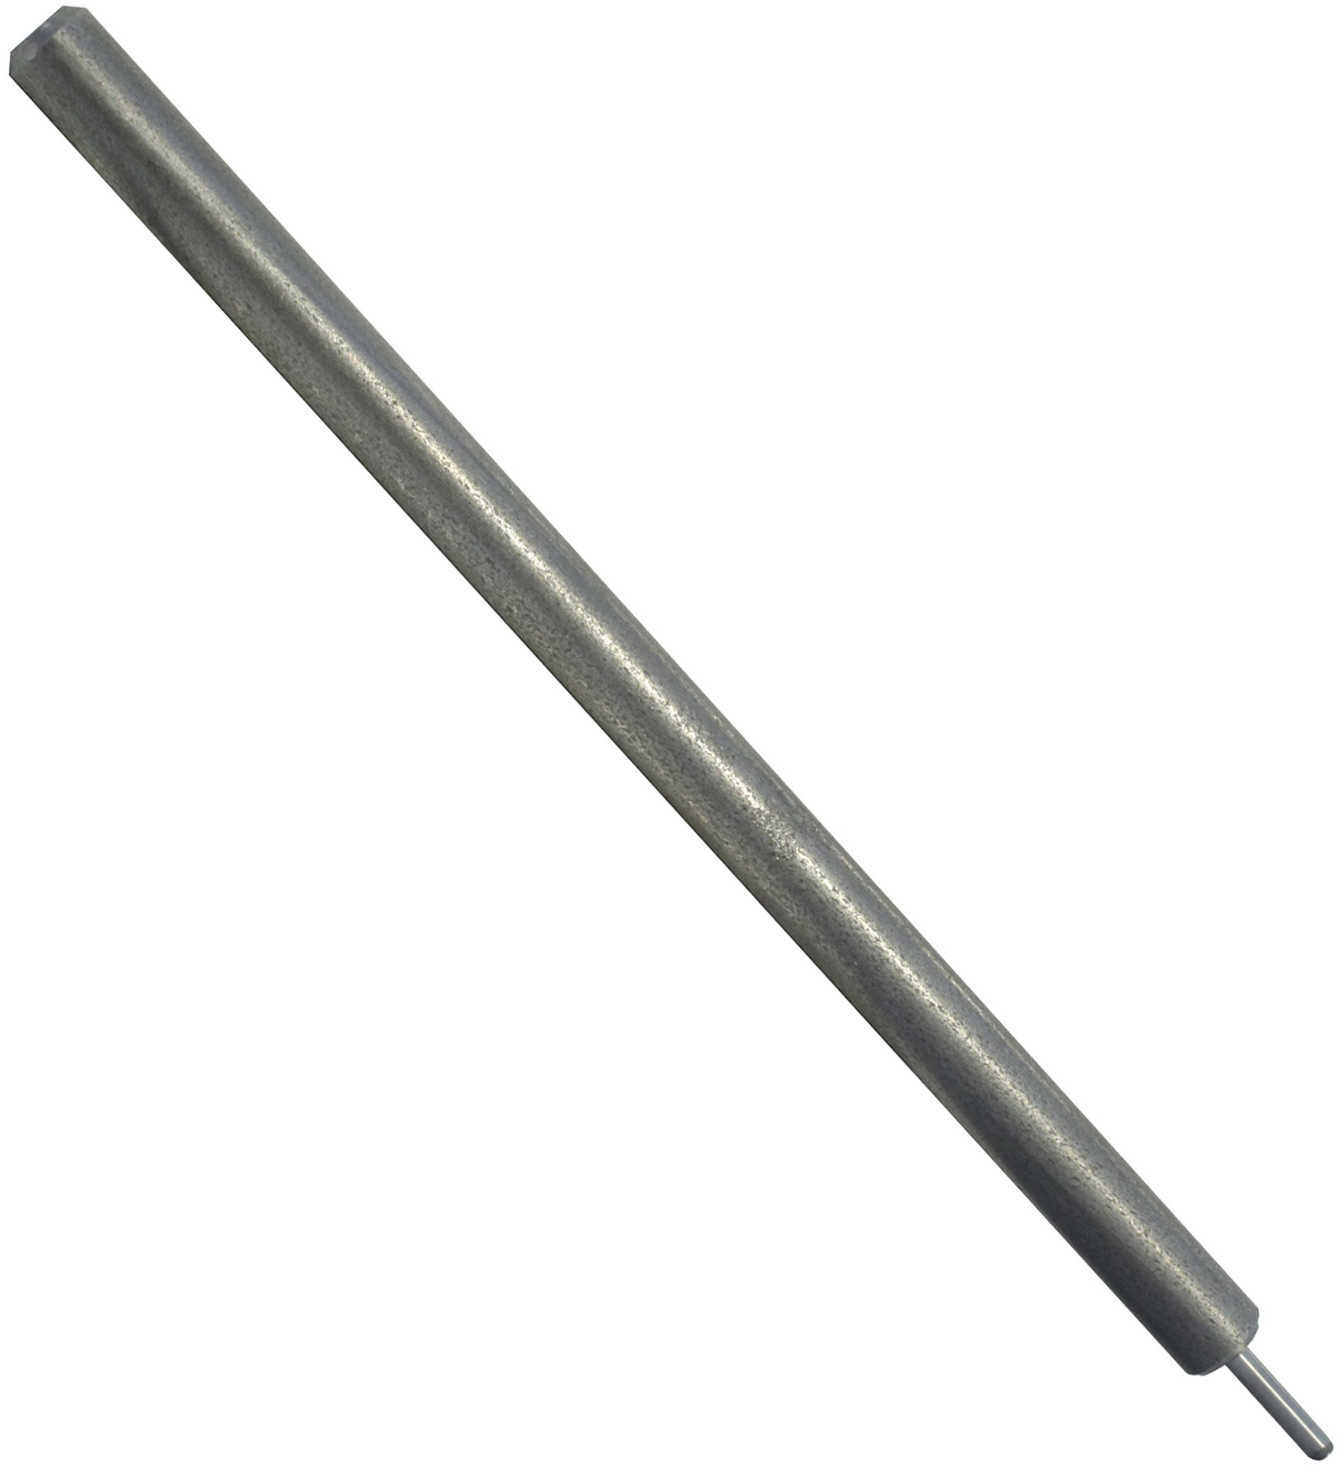 Lee Universal Decapping Replacement Pin Md: 90783